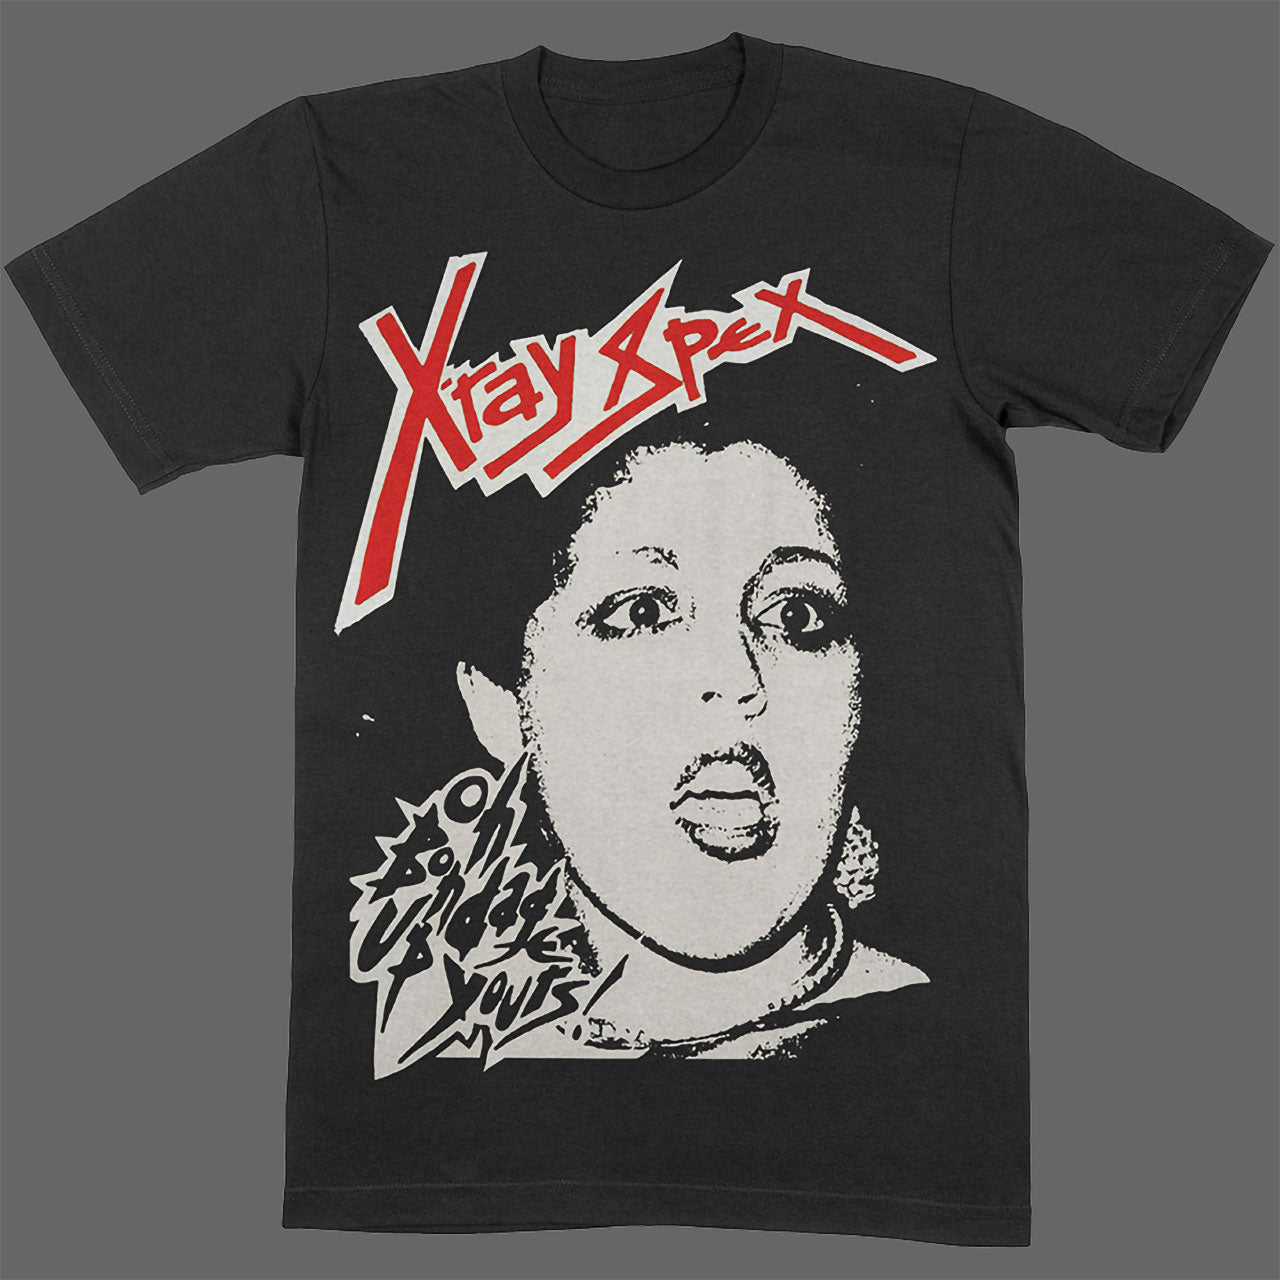 X-Ray Spex - Oh Bondage Up Yours (T-Shirt)